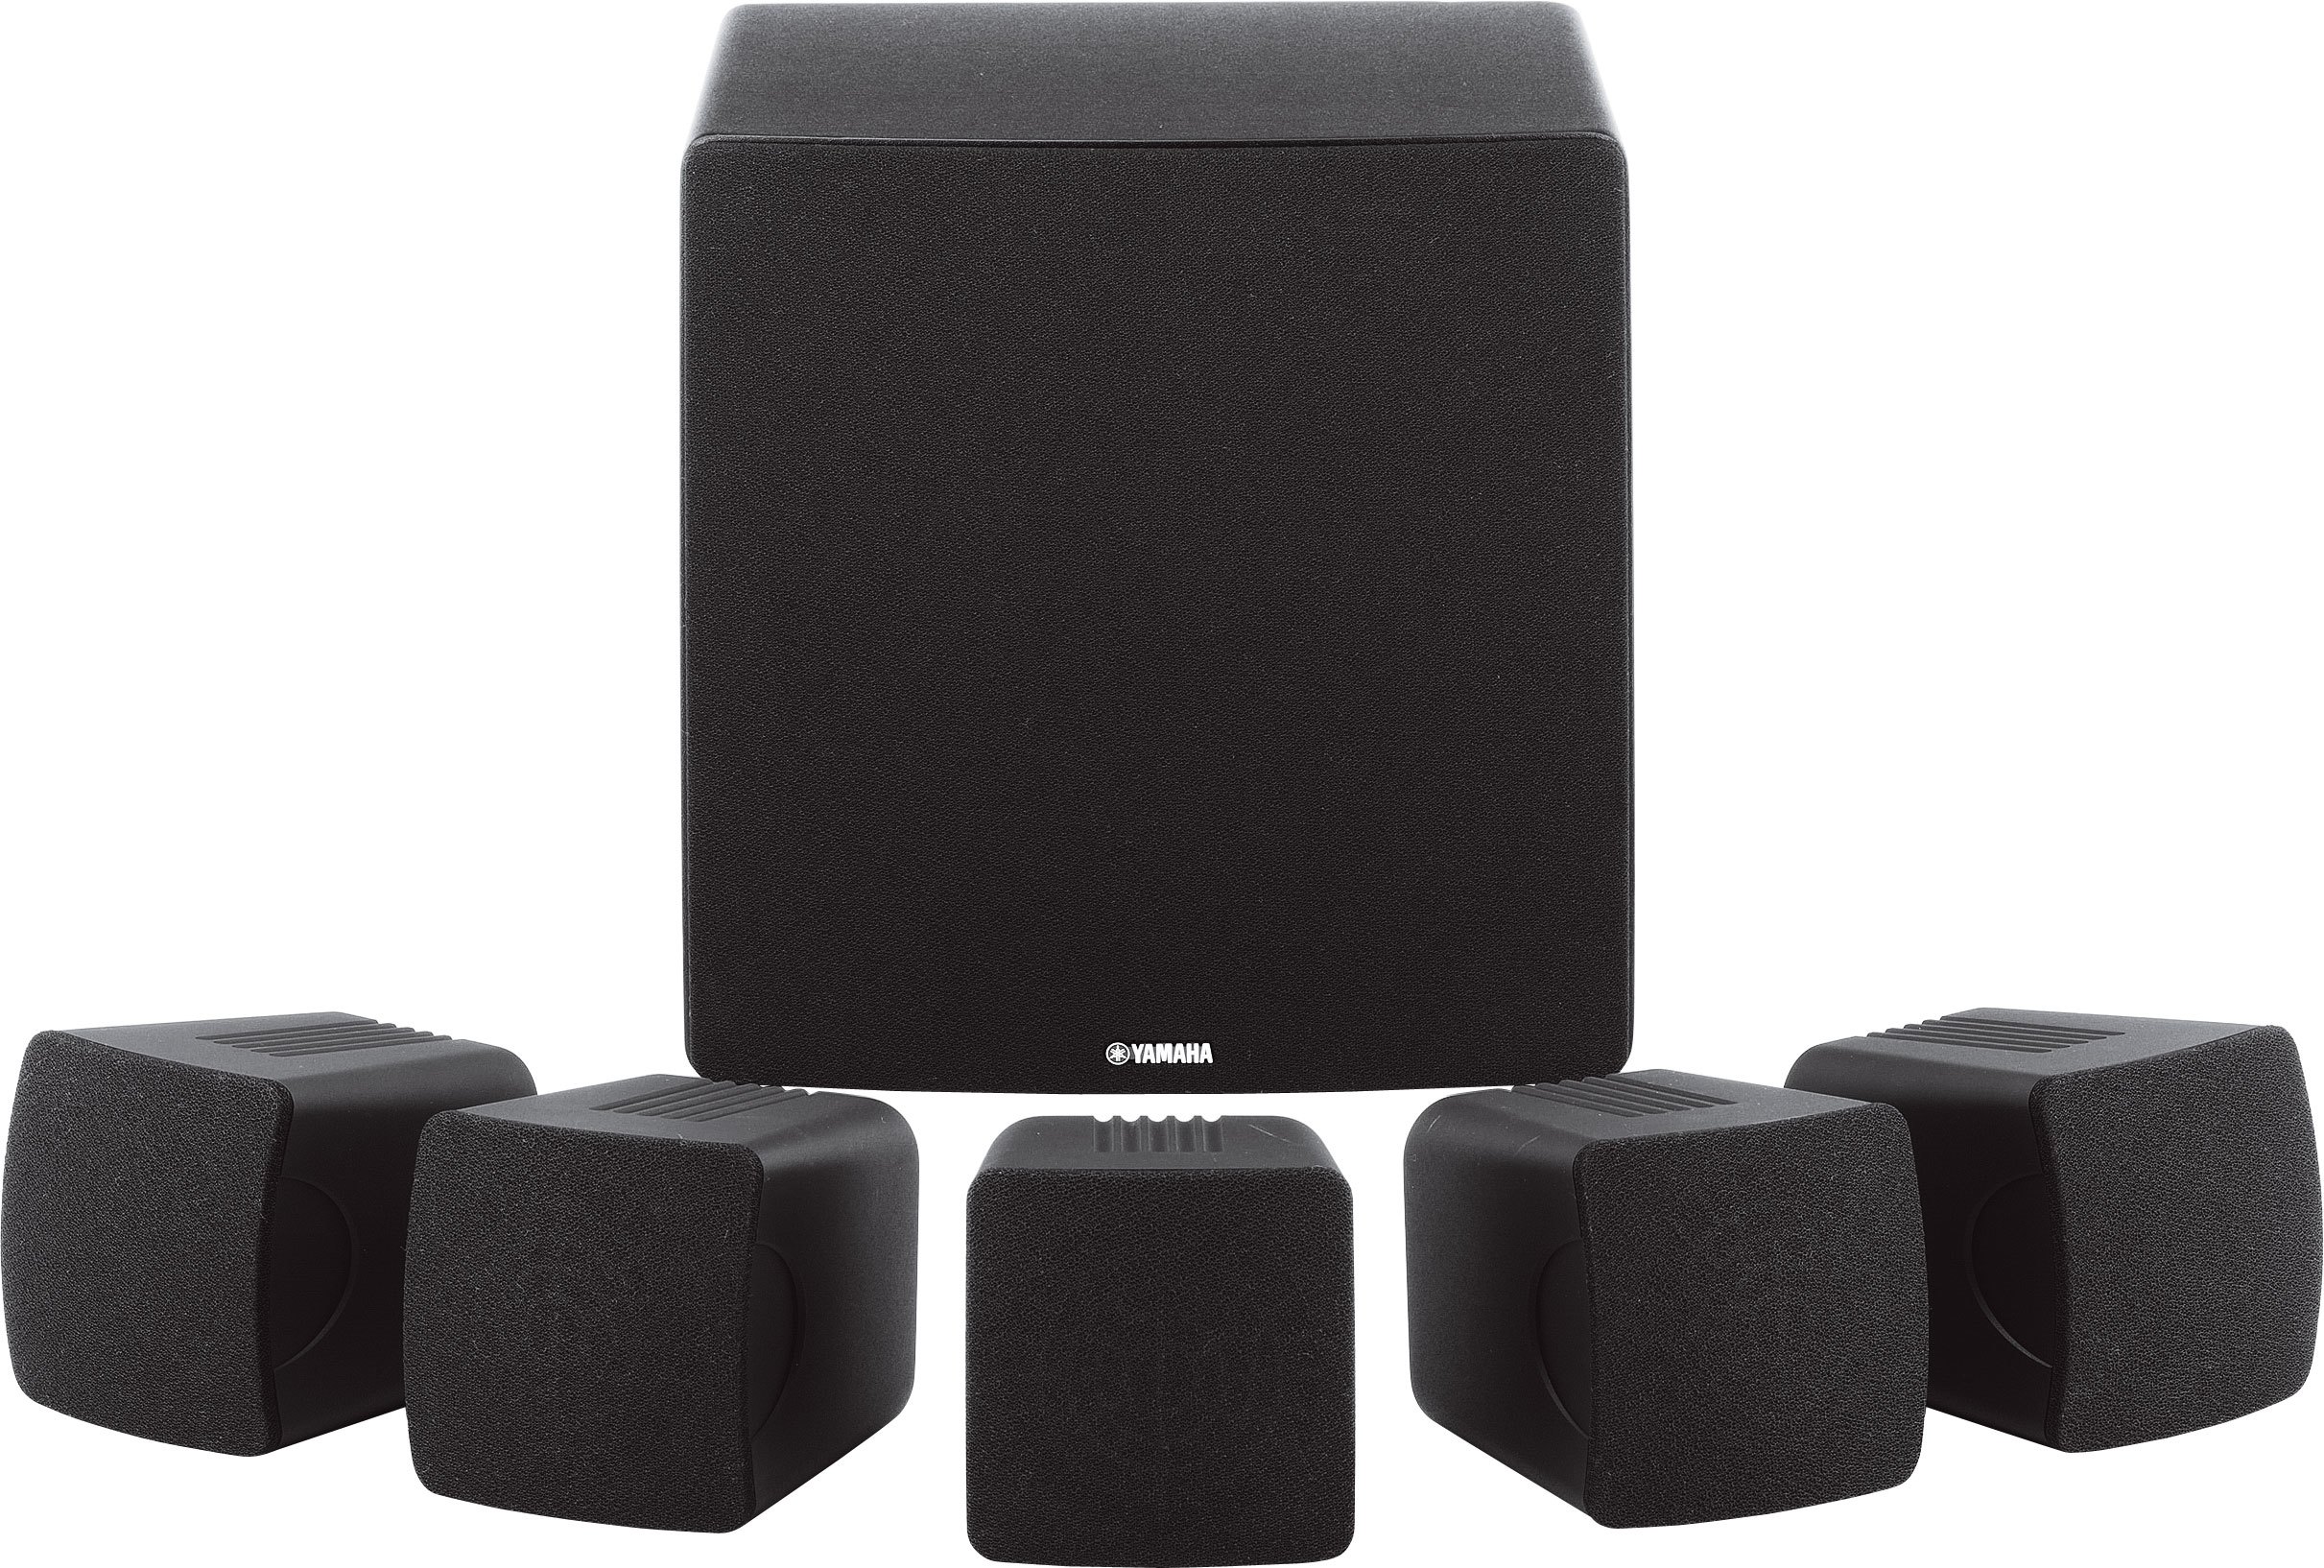 NS-P280 - Overview - Speaker Systems - Audio & Visual - Products